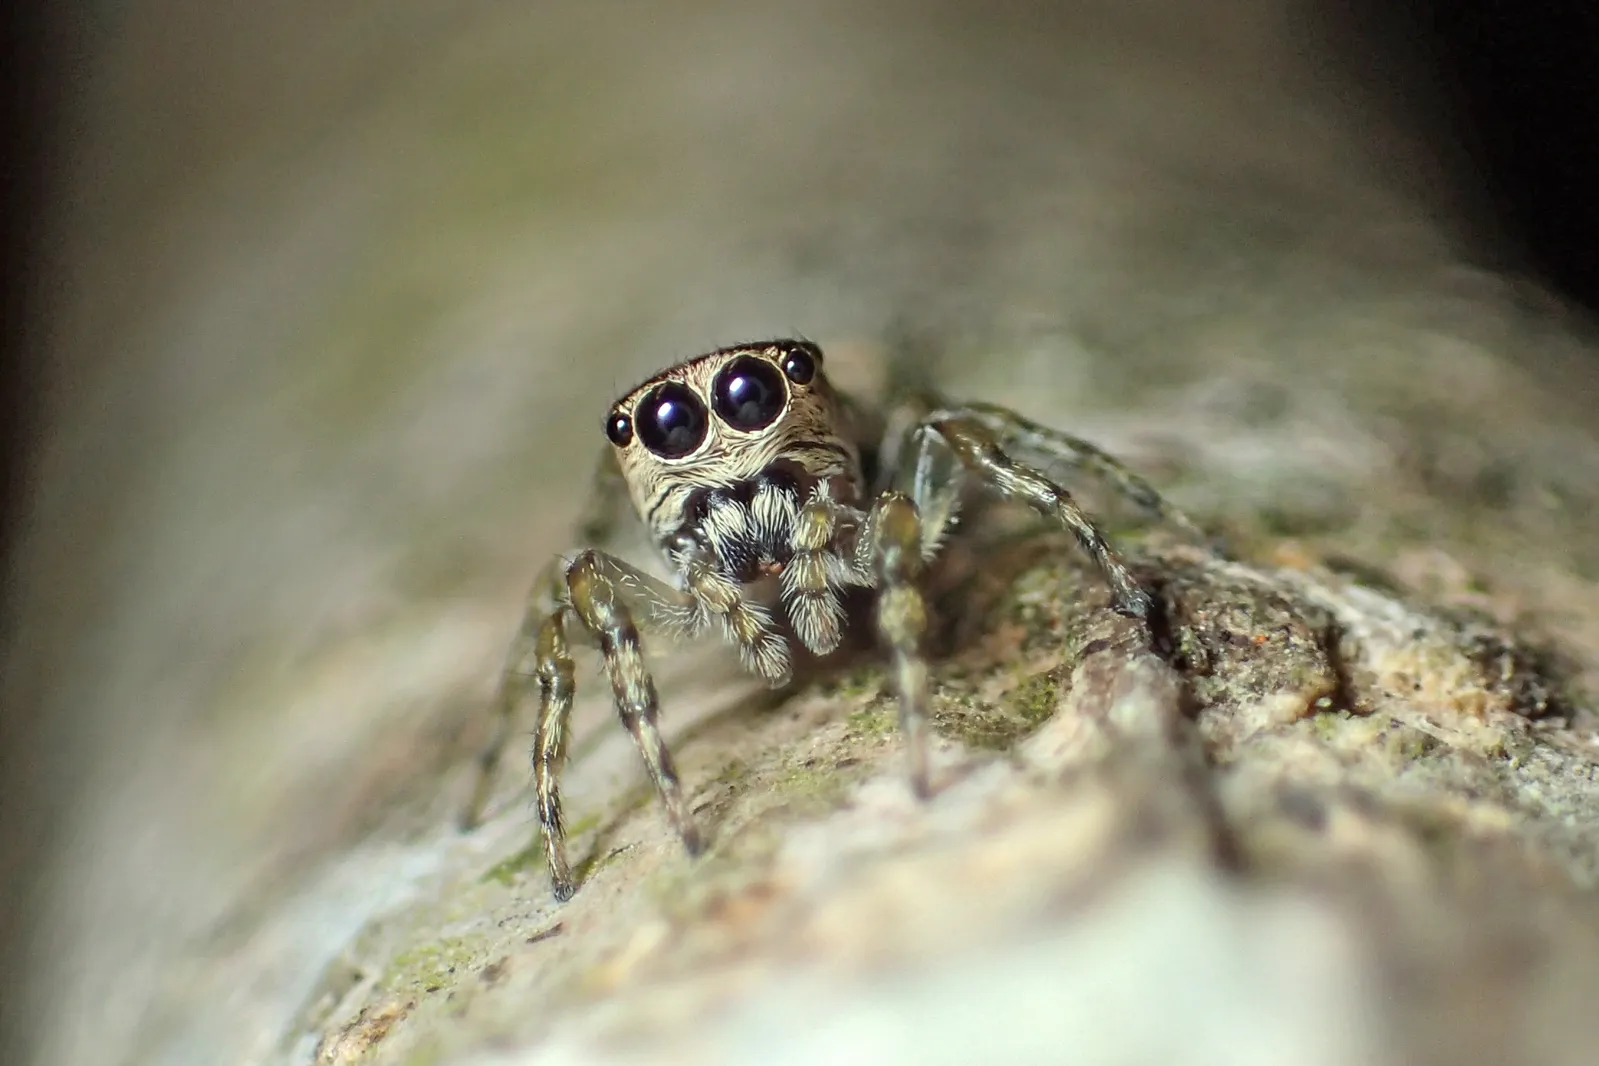 Scientists Identify 50,000th Spider Species on Earth—but Thousands More Are Waiting to Be Discovered